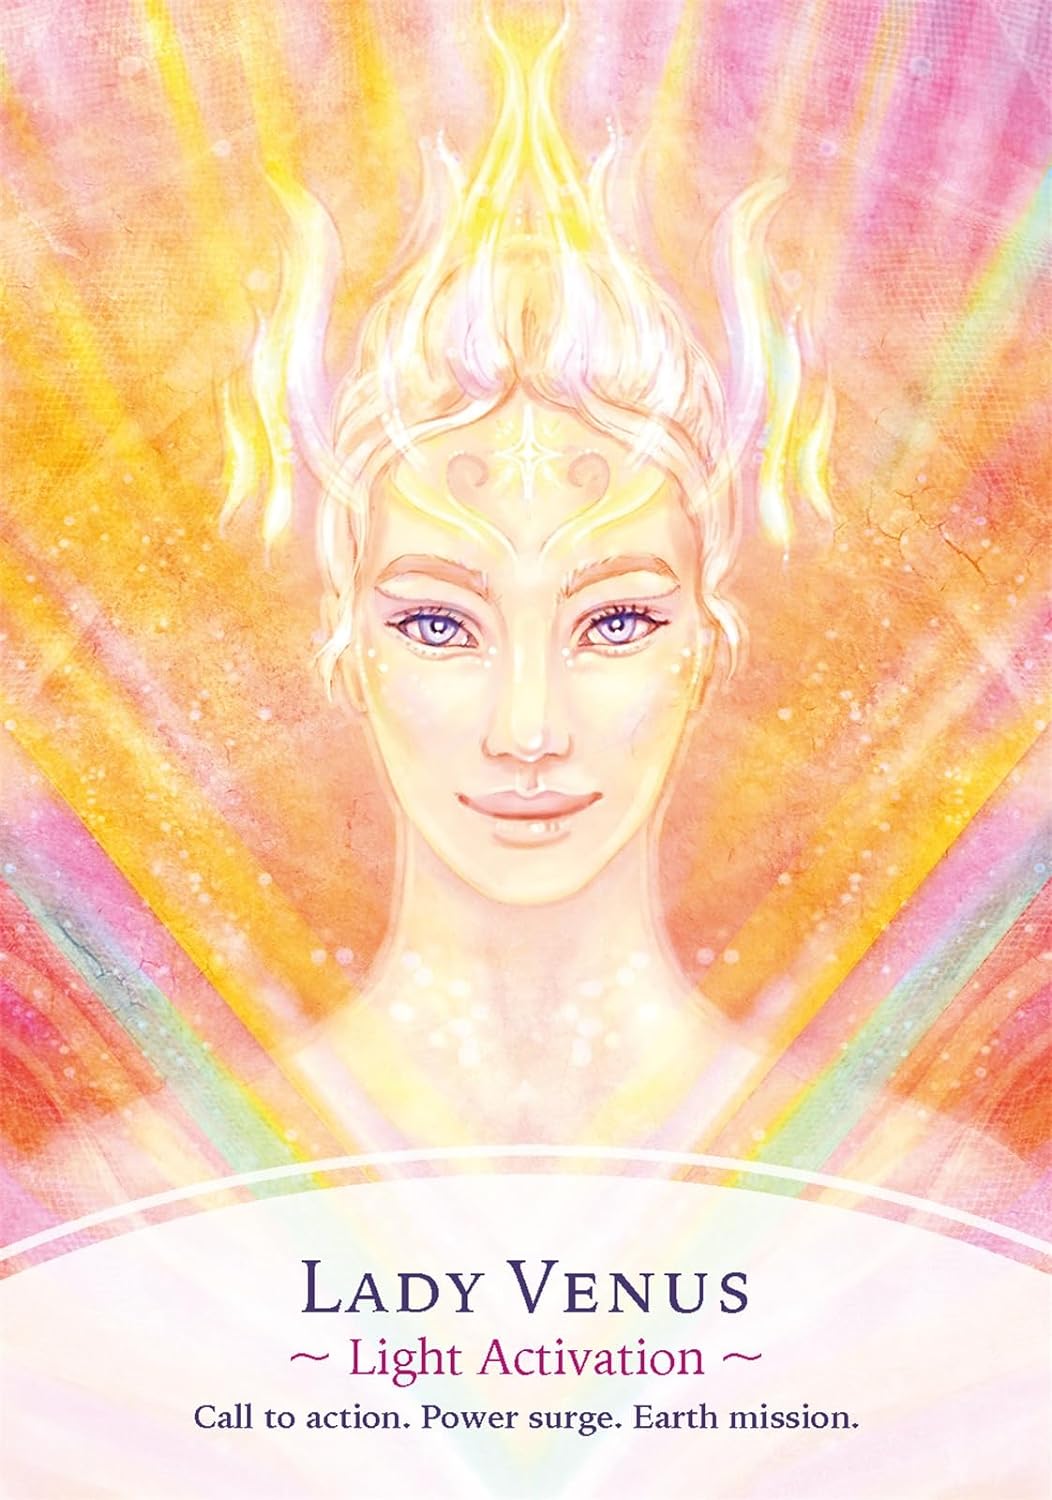 The Divine Masters Oracle Cards